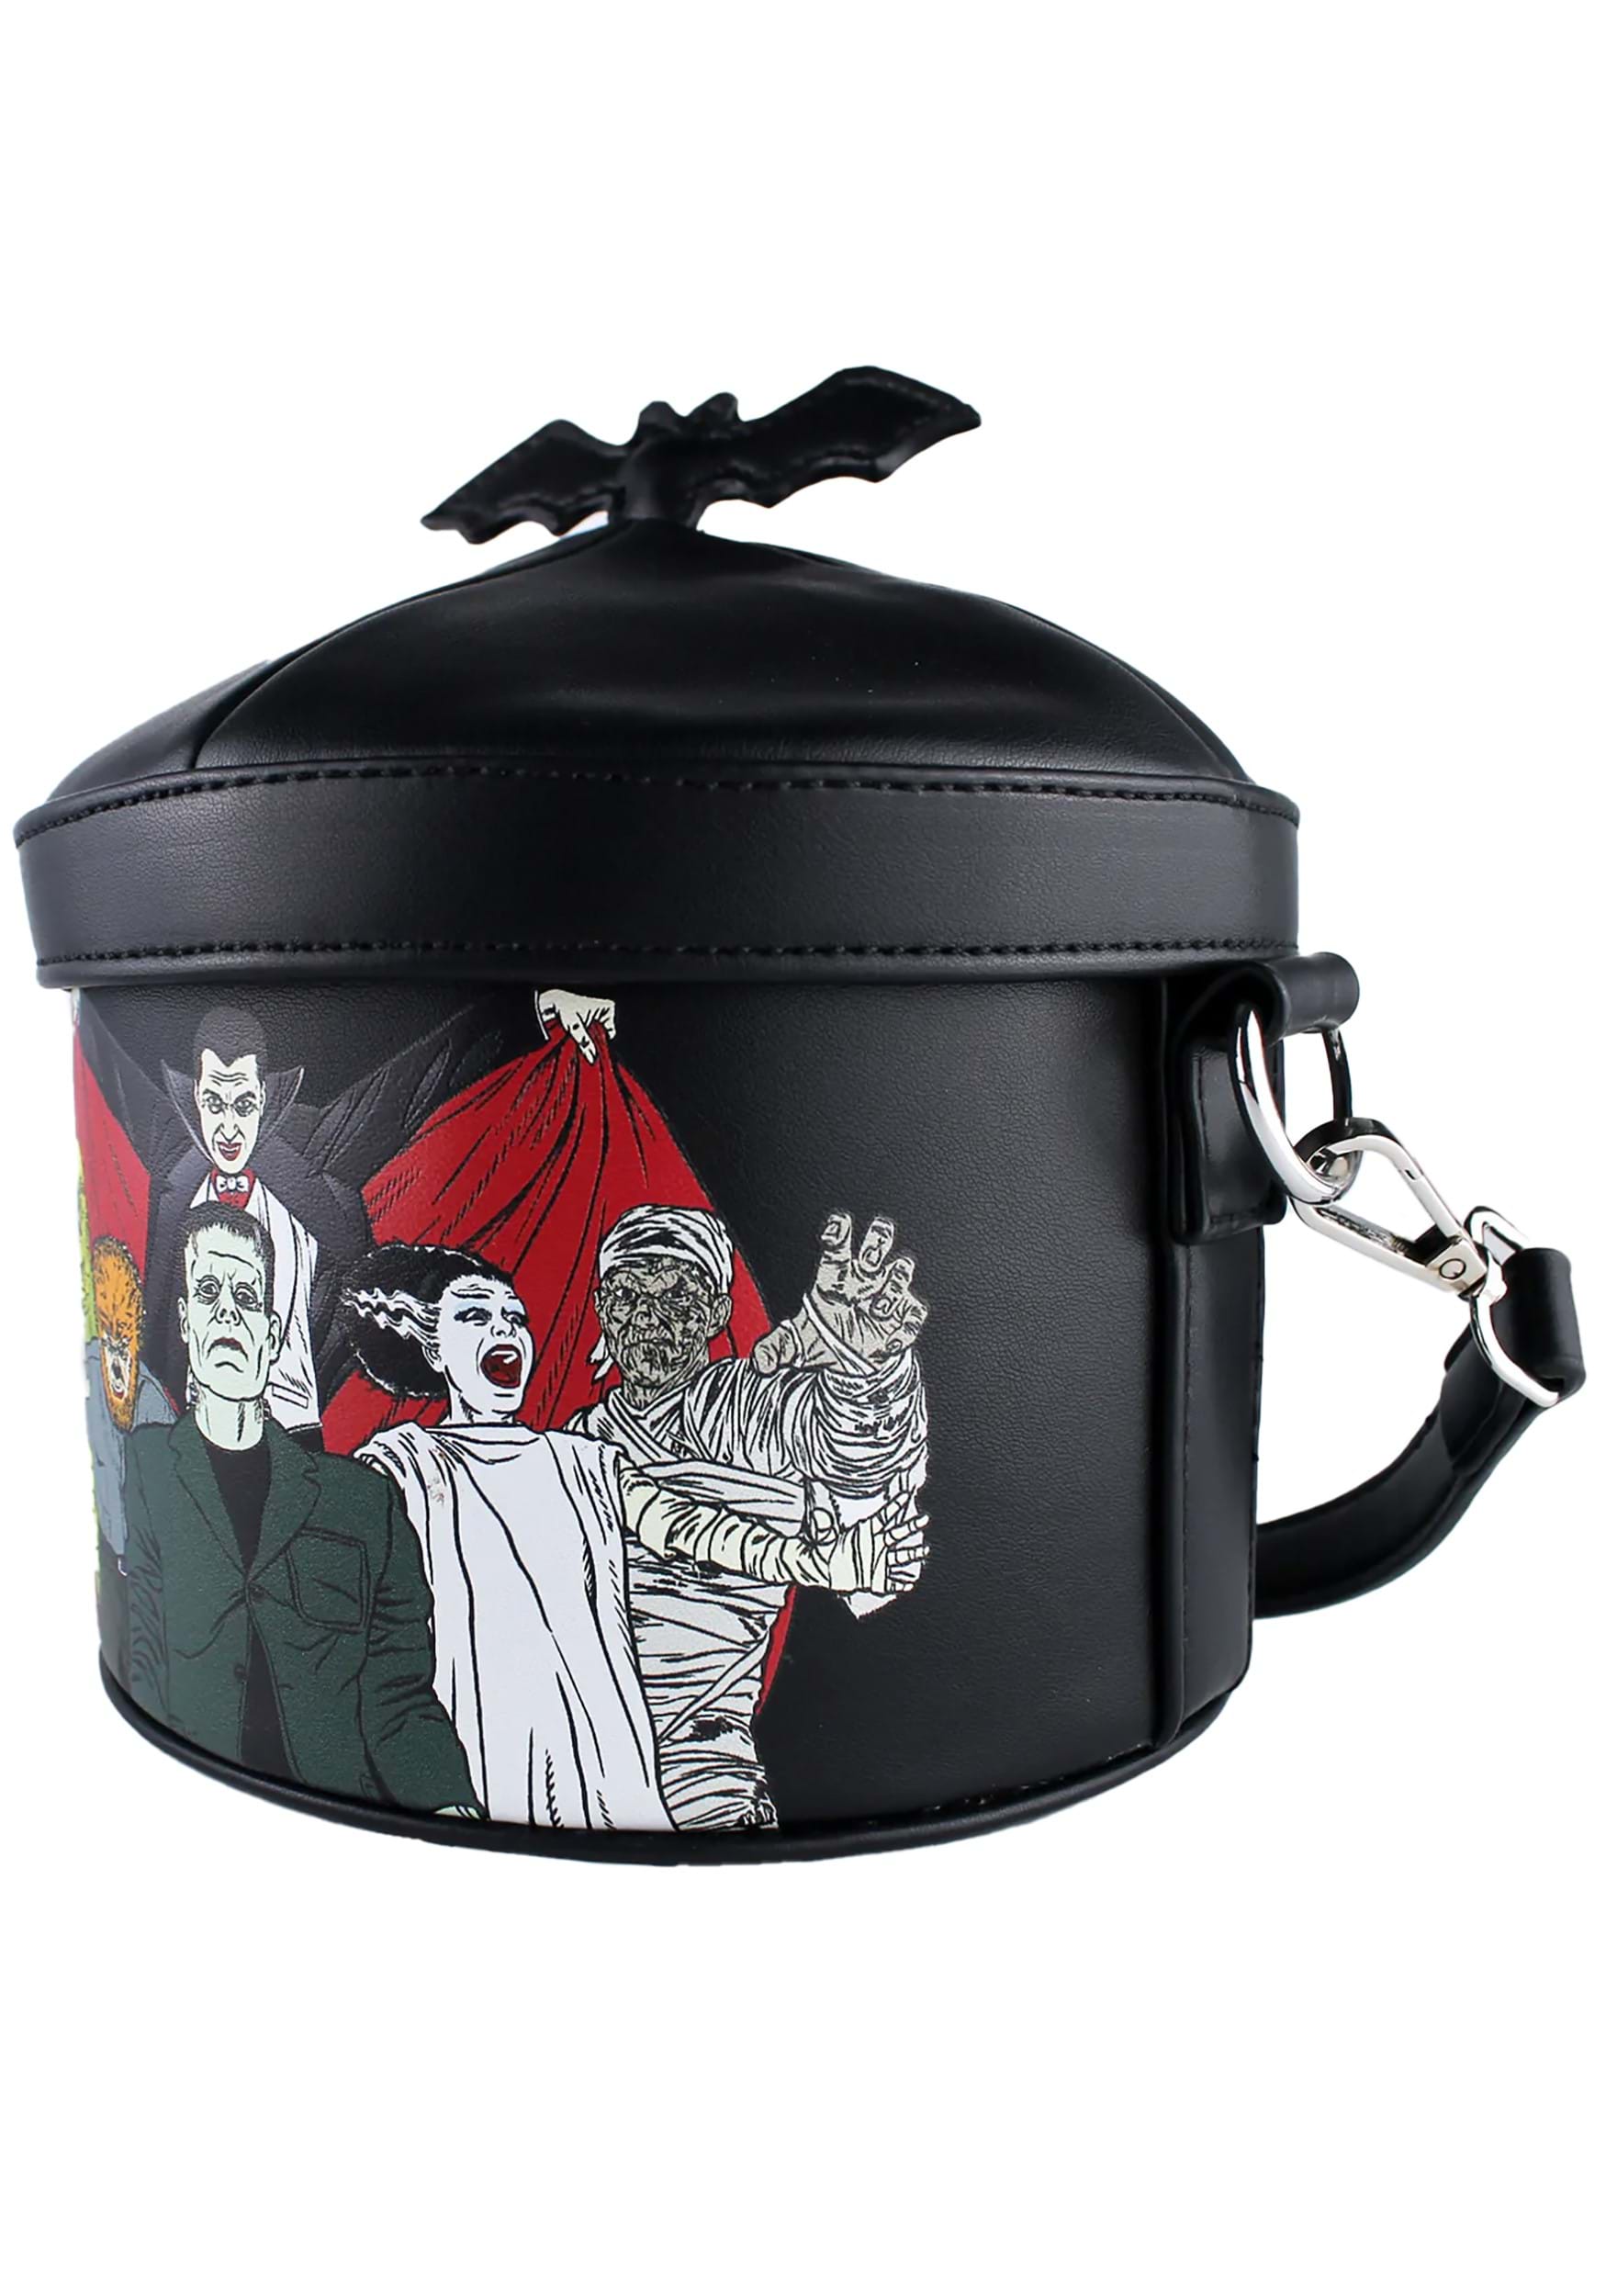 https://images.fun.com/products/88595/2-1-251048/universal-monsters-trick-or-treat-bucket-purse-alt-4.jpg